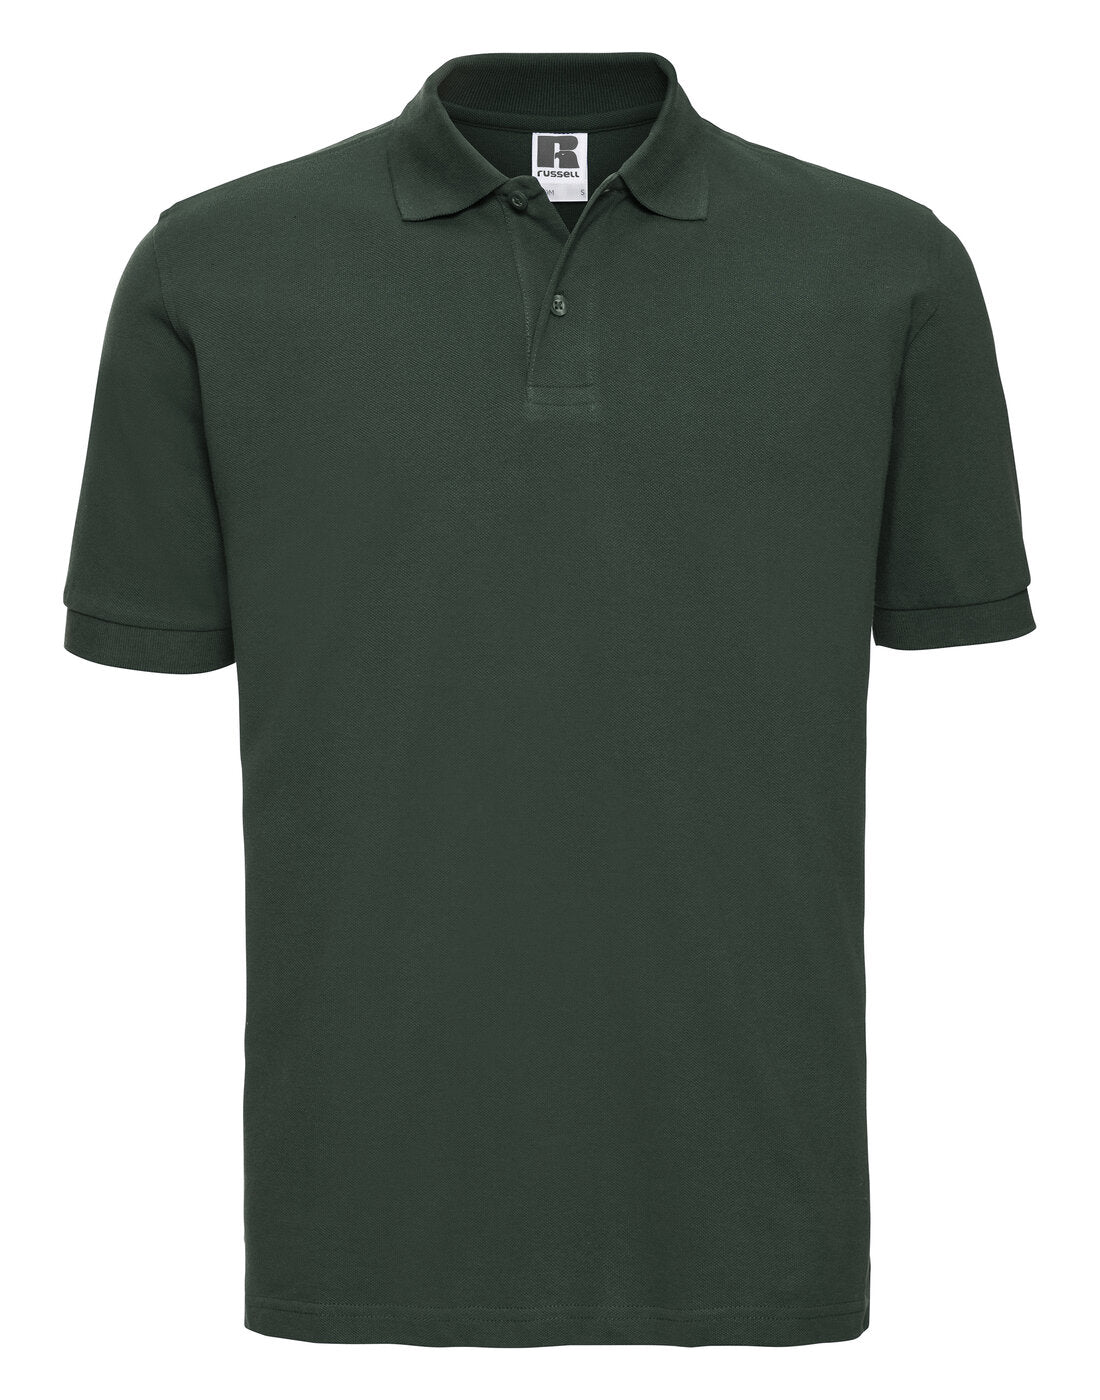 Russell Classic Cotton Polo - 569M Bottle Green